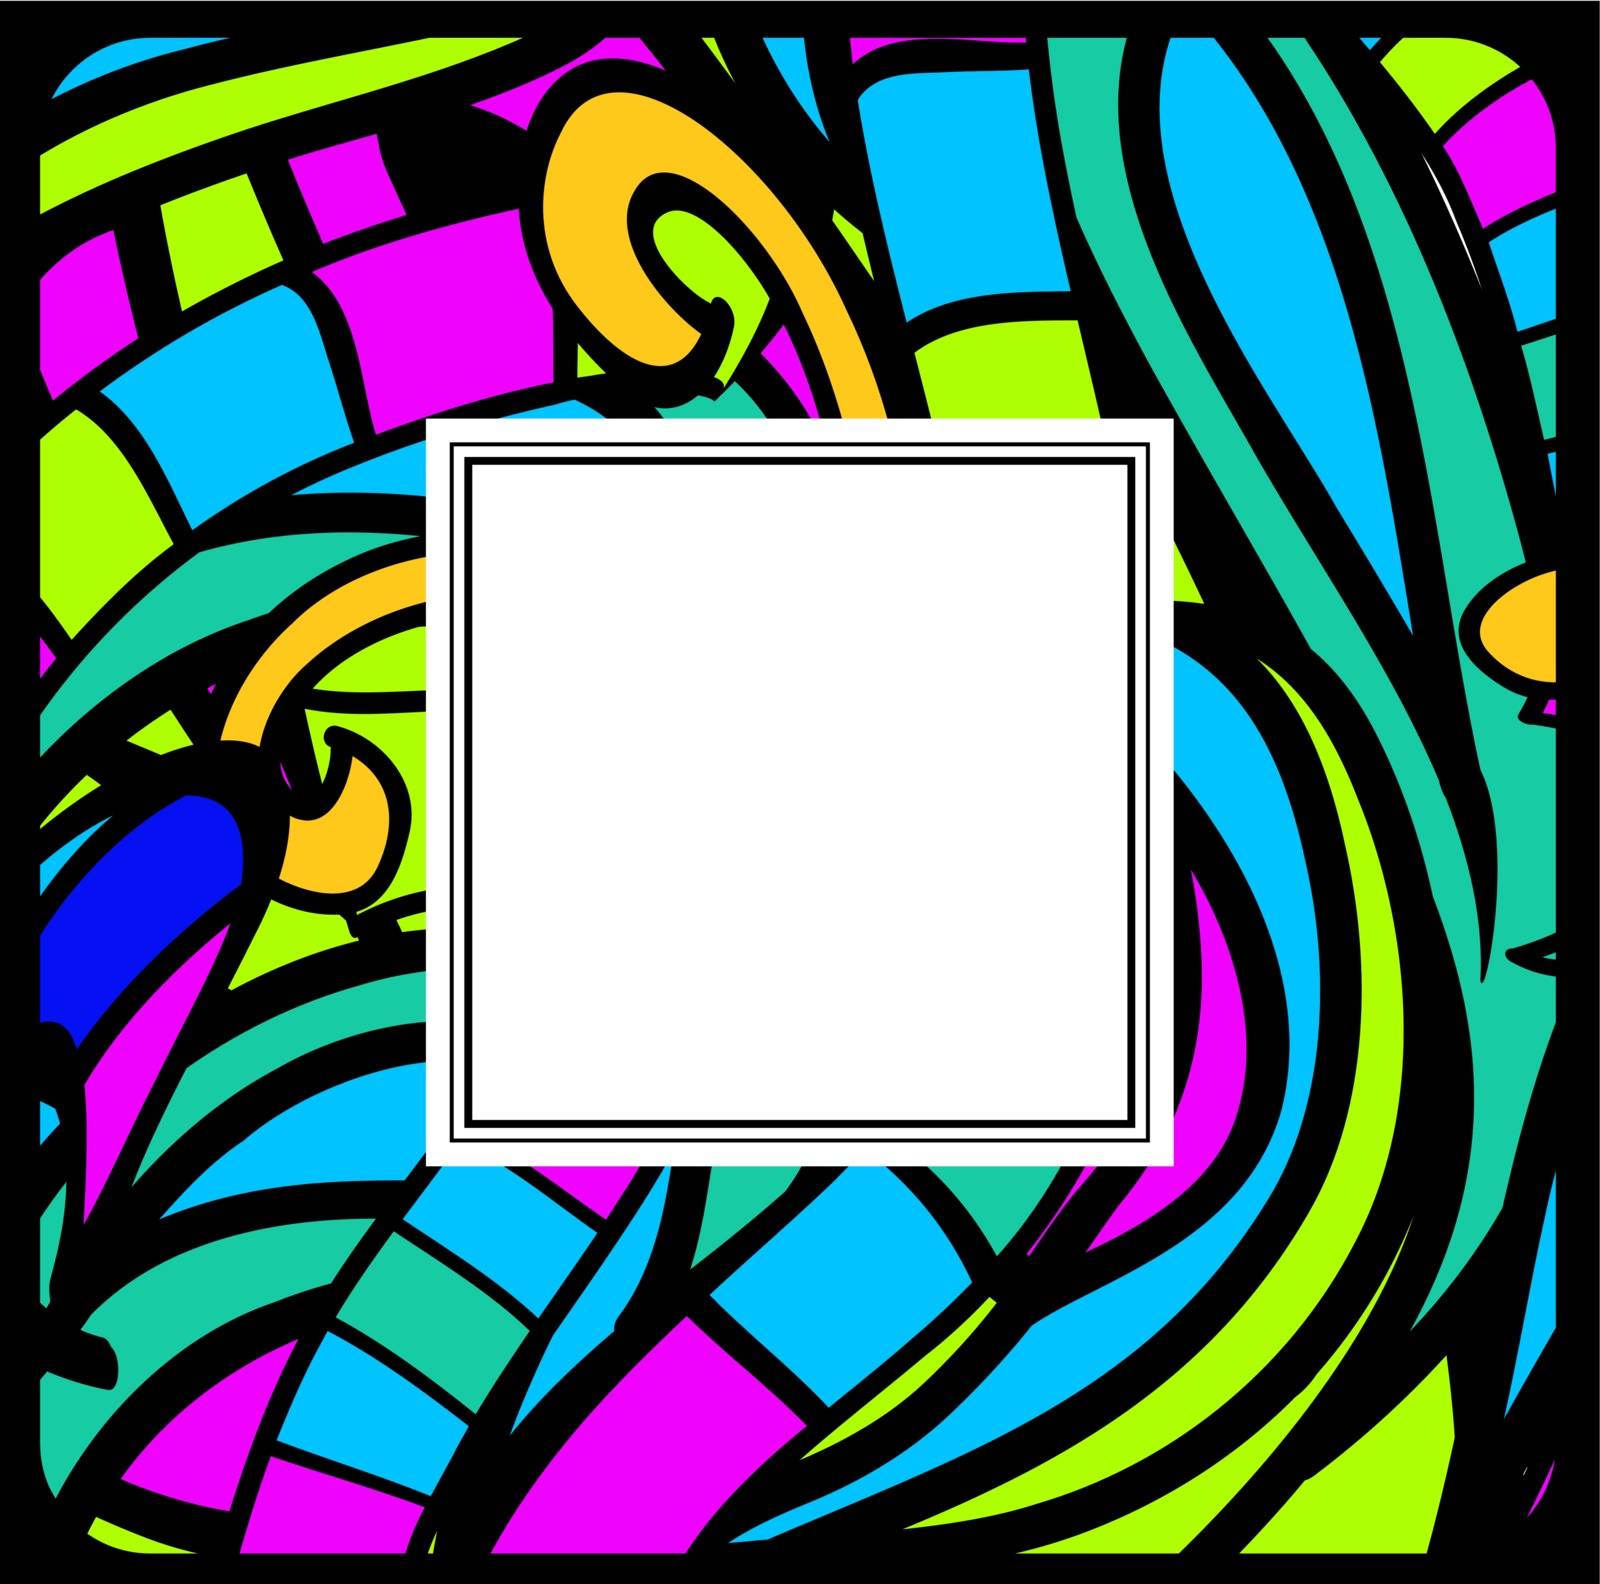 Multicolored Stained-Glass Abstract Frame, Copyspace